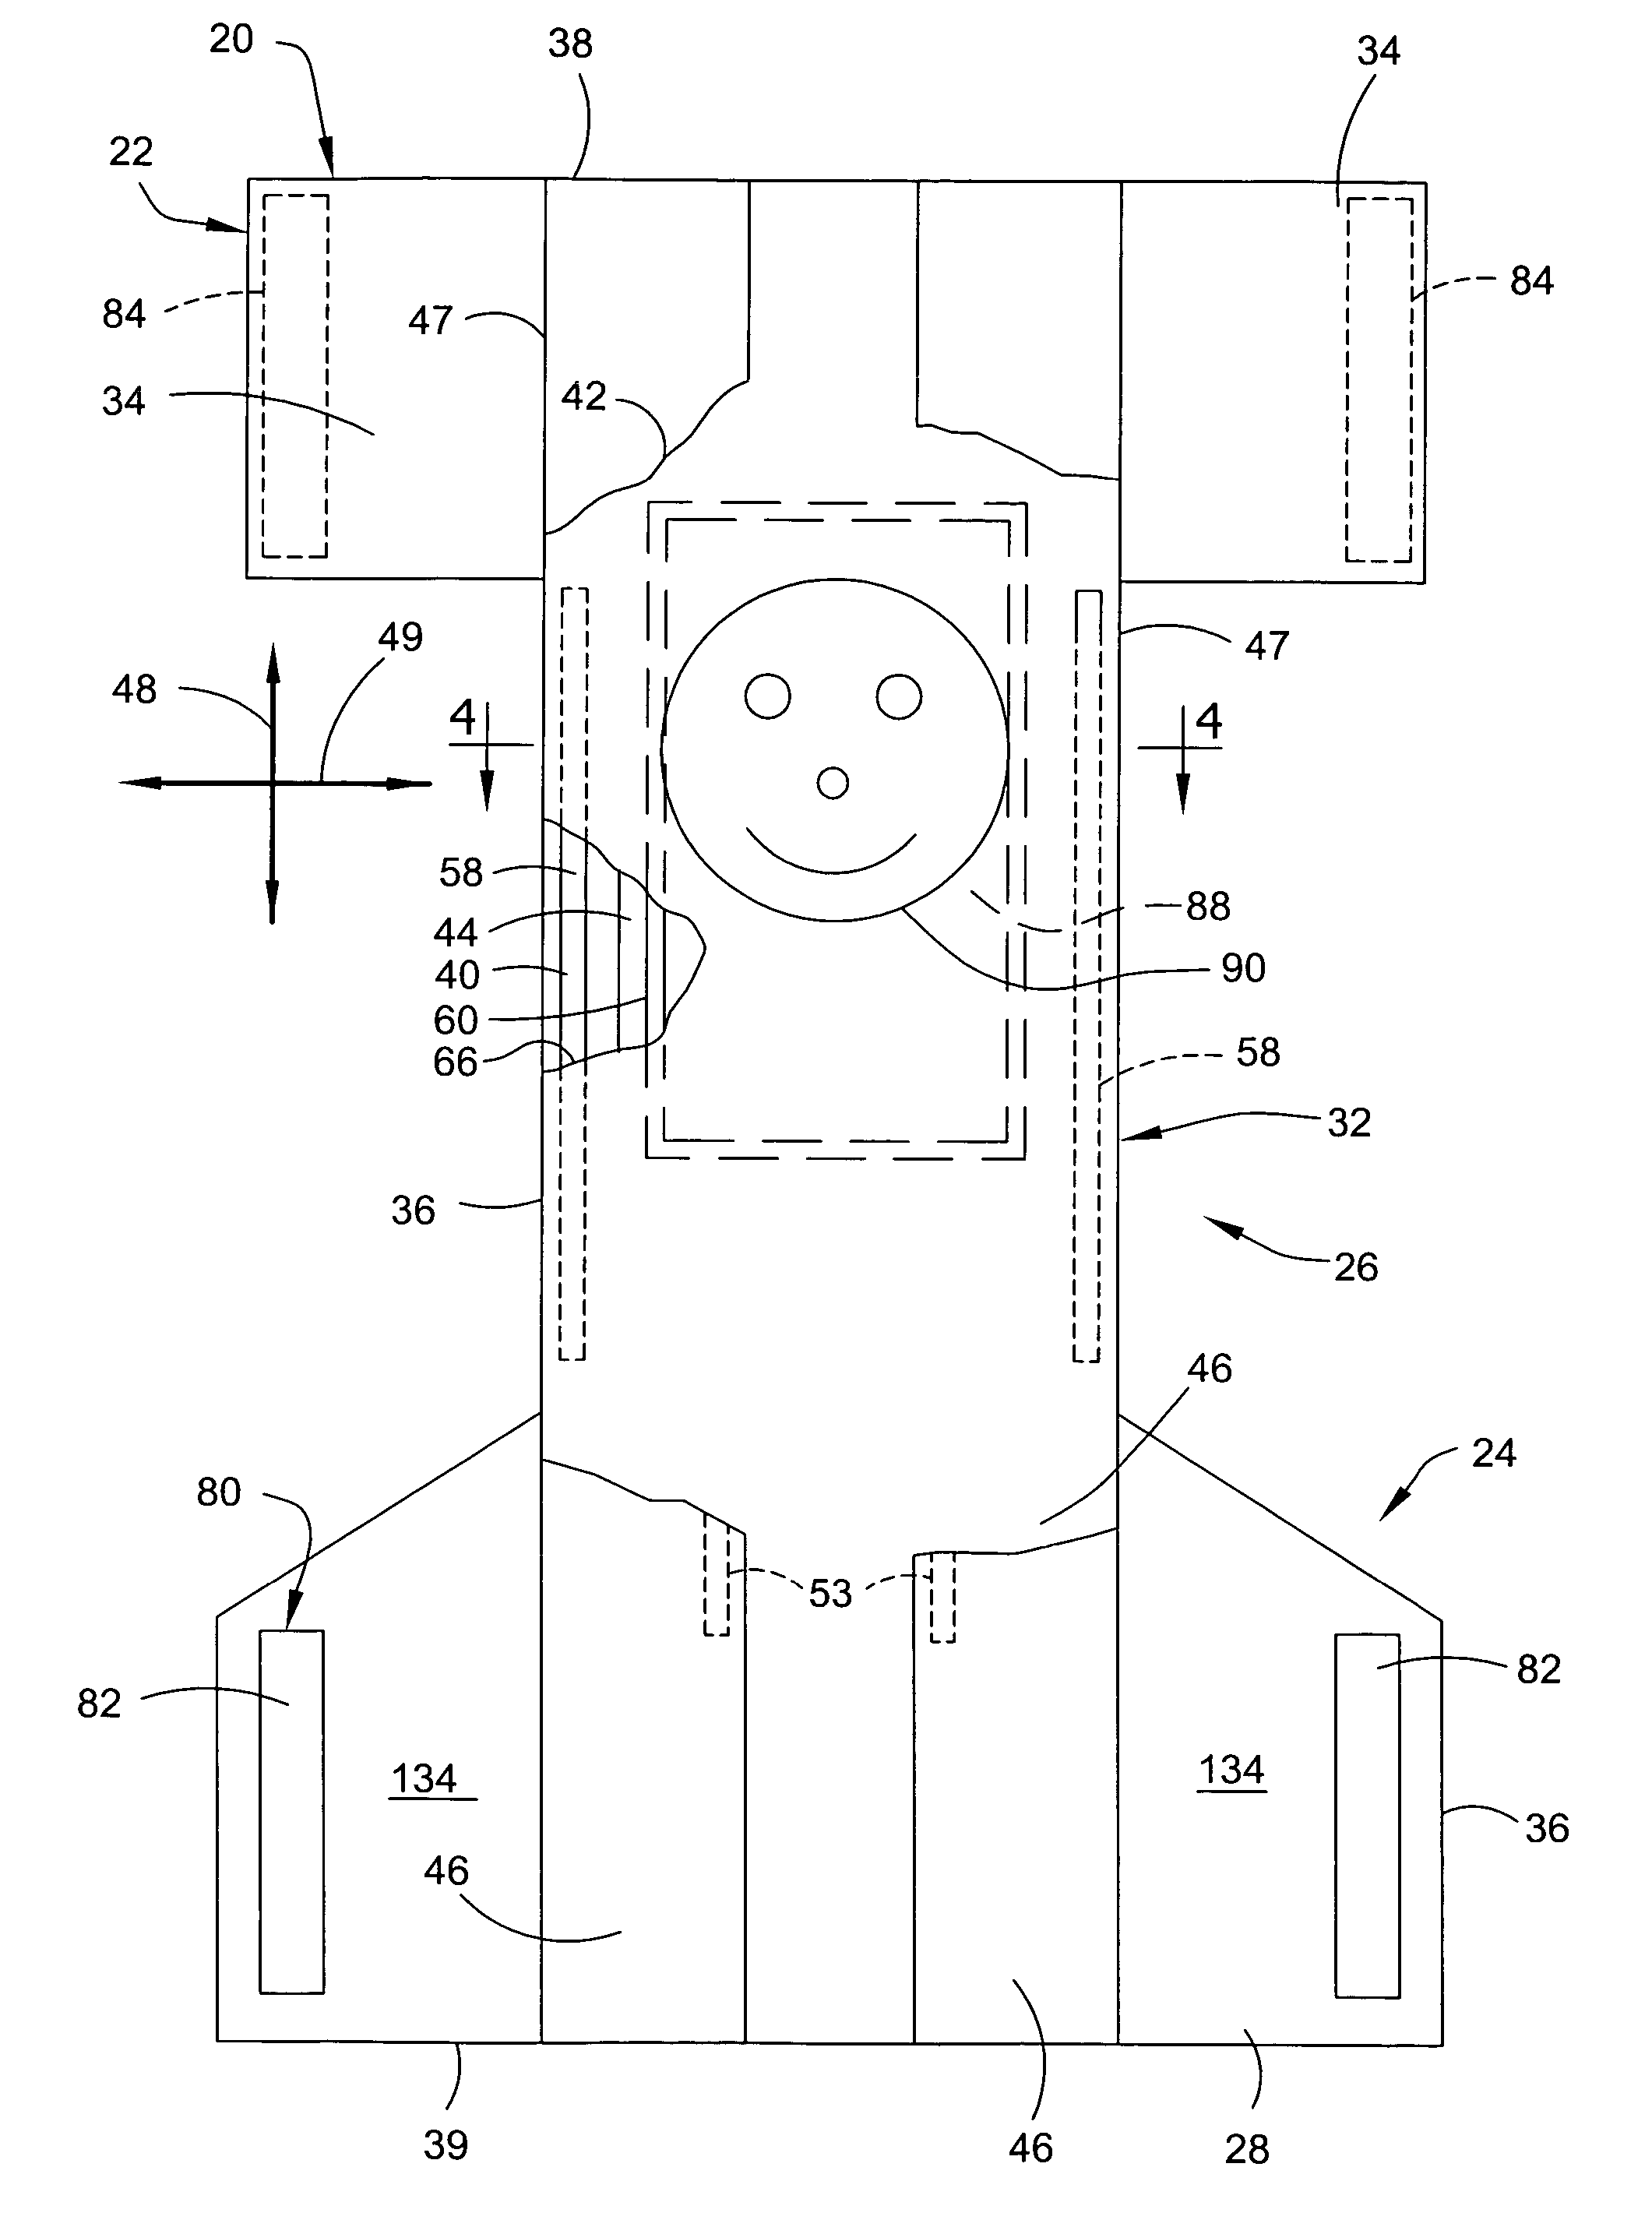 Absorbent article component having applied graphic, and process for making same